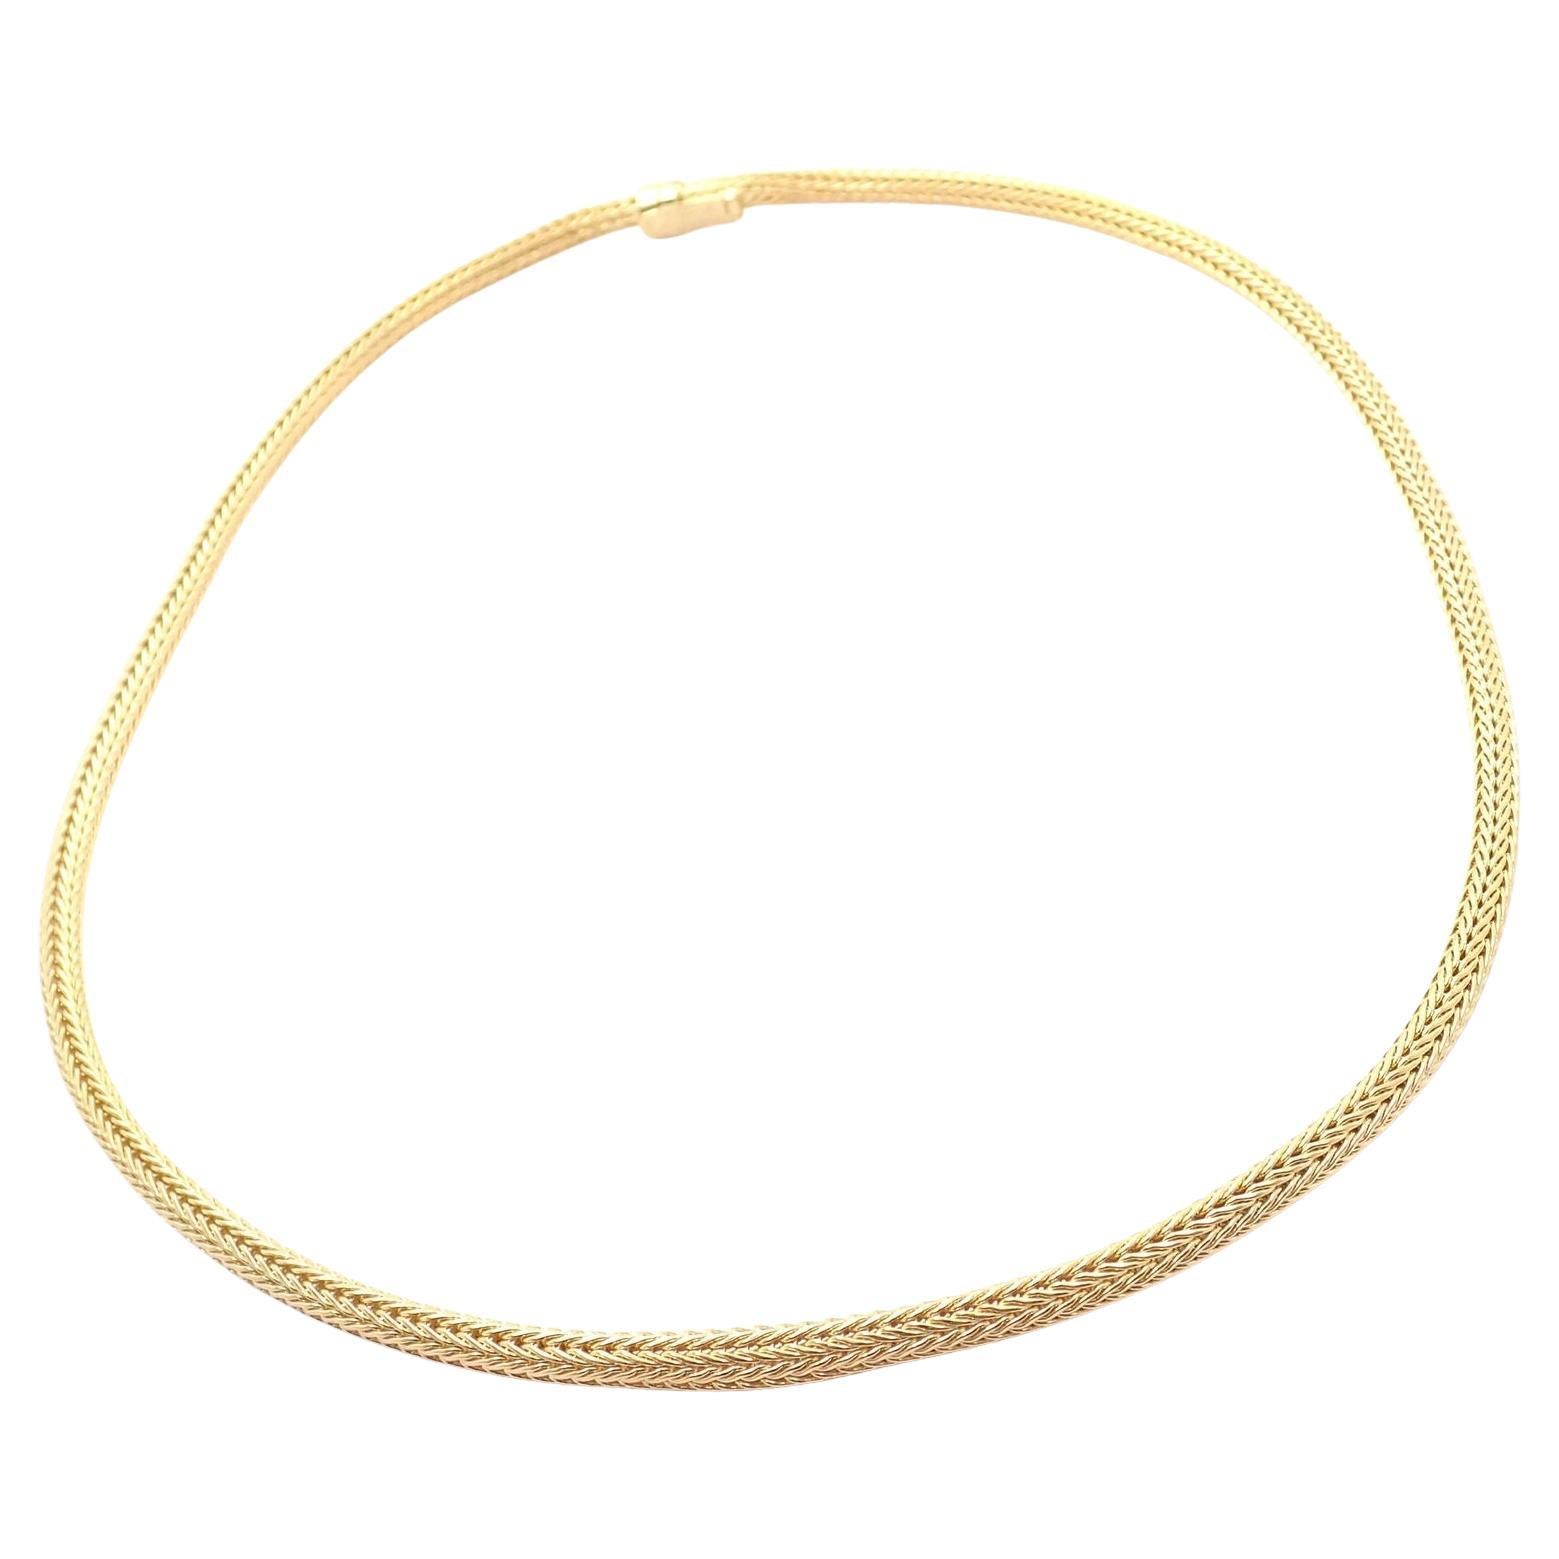 Tiffany & Co. 1960's 14 Karat Yellow Gold Paperclip Chain Vintage